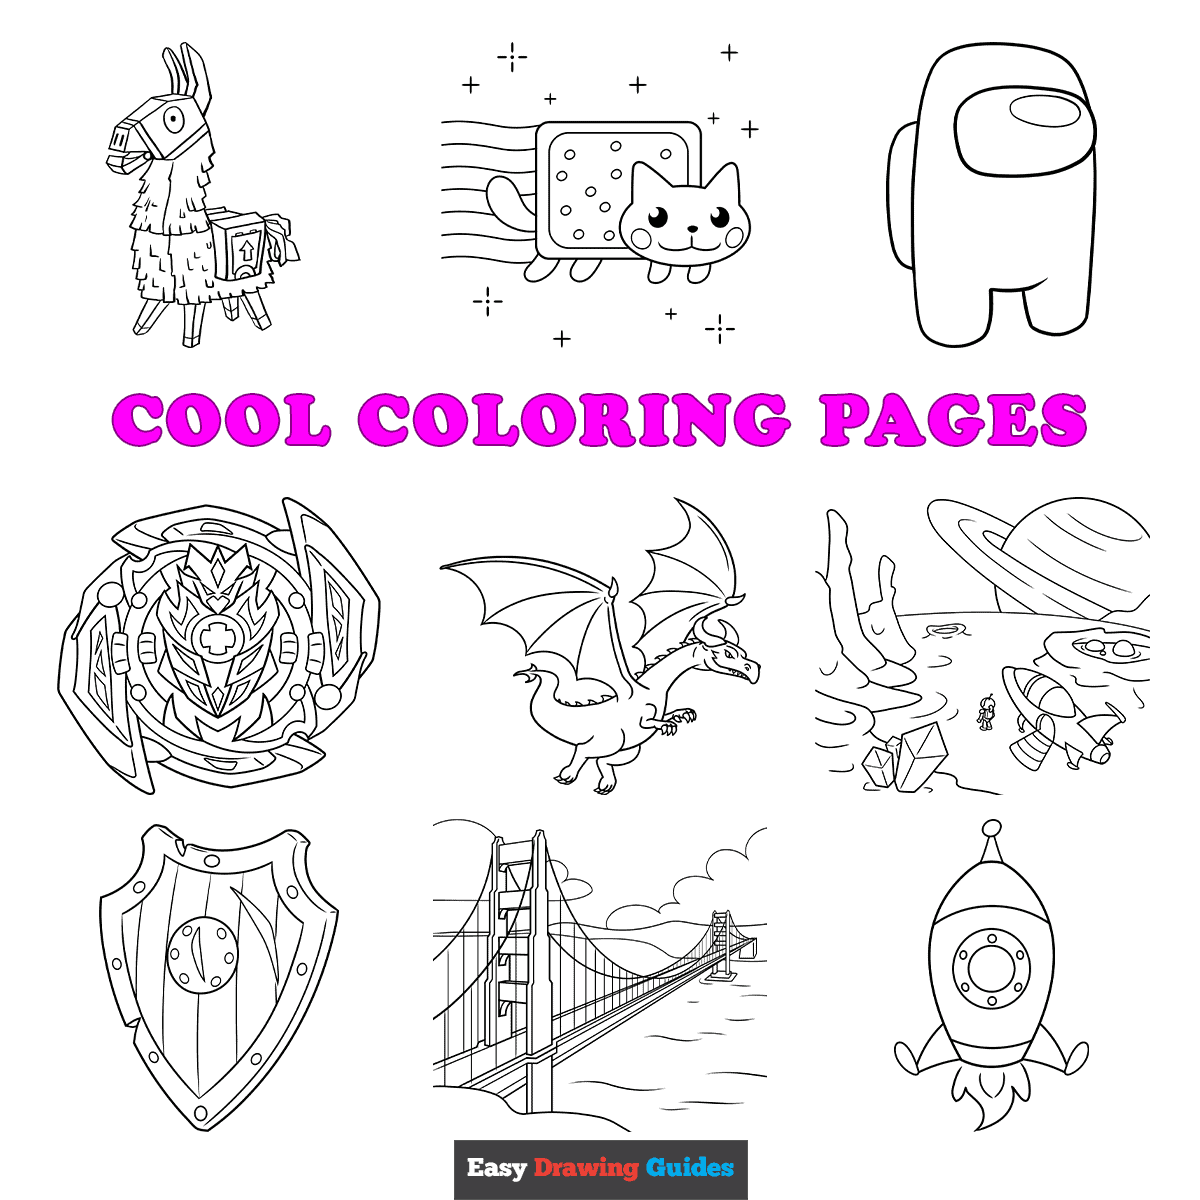 Free printable cool coloring pages for kids